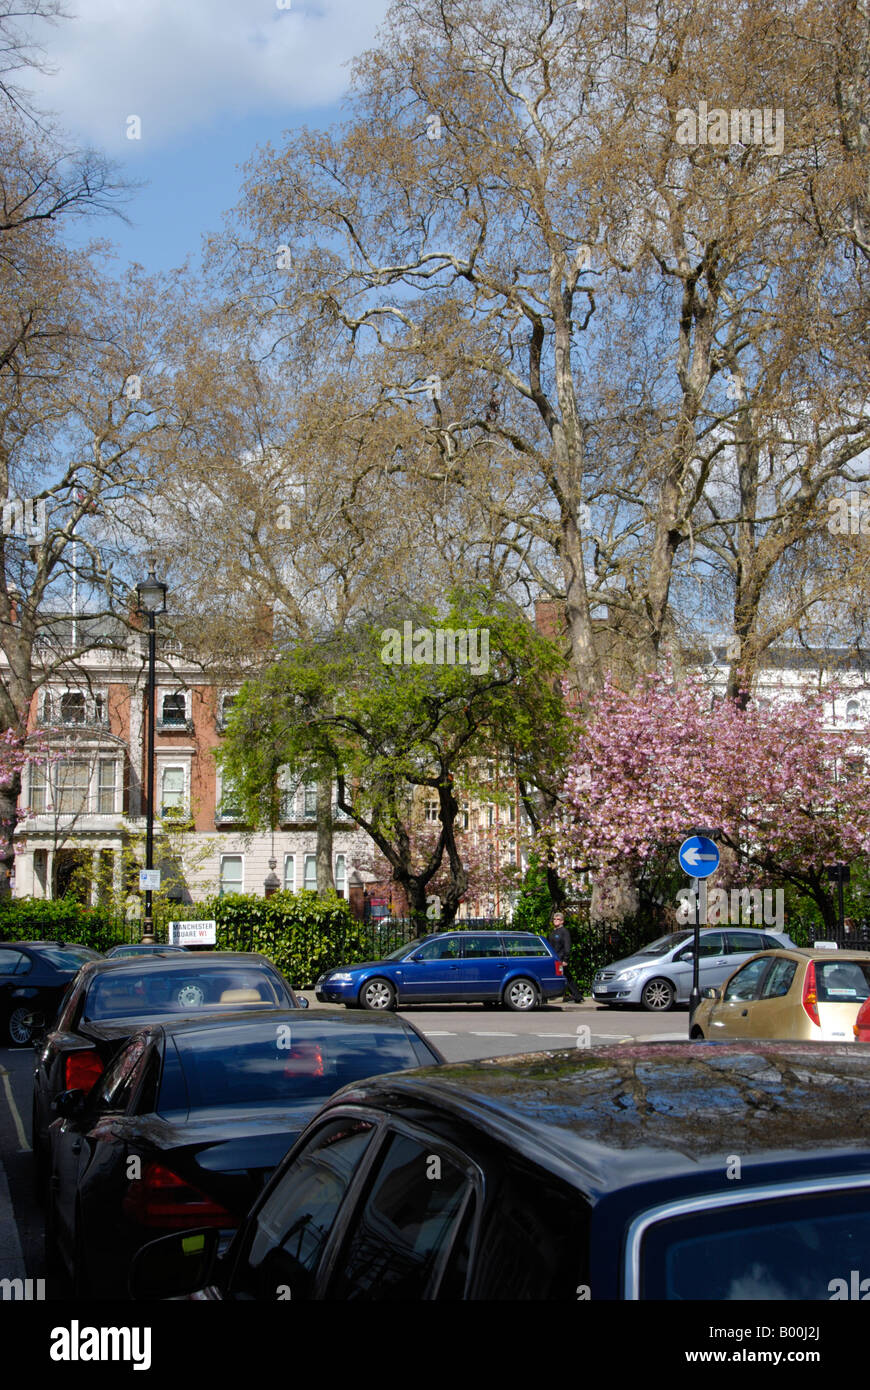 View of private garden in Manchester Square London Stock Photo